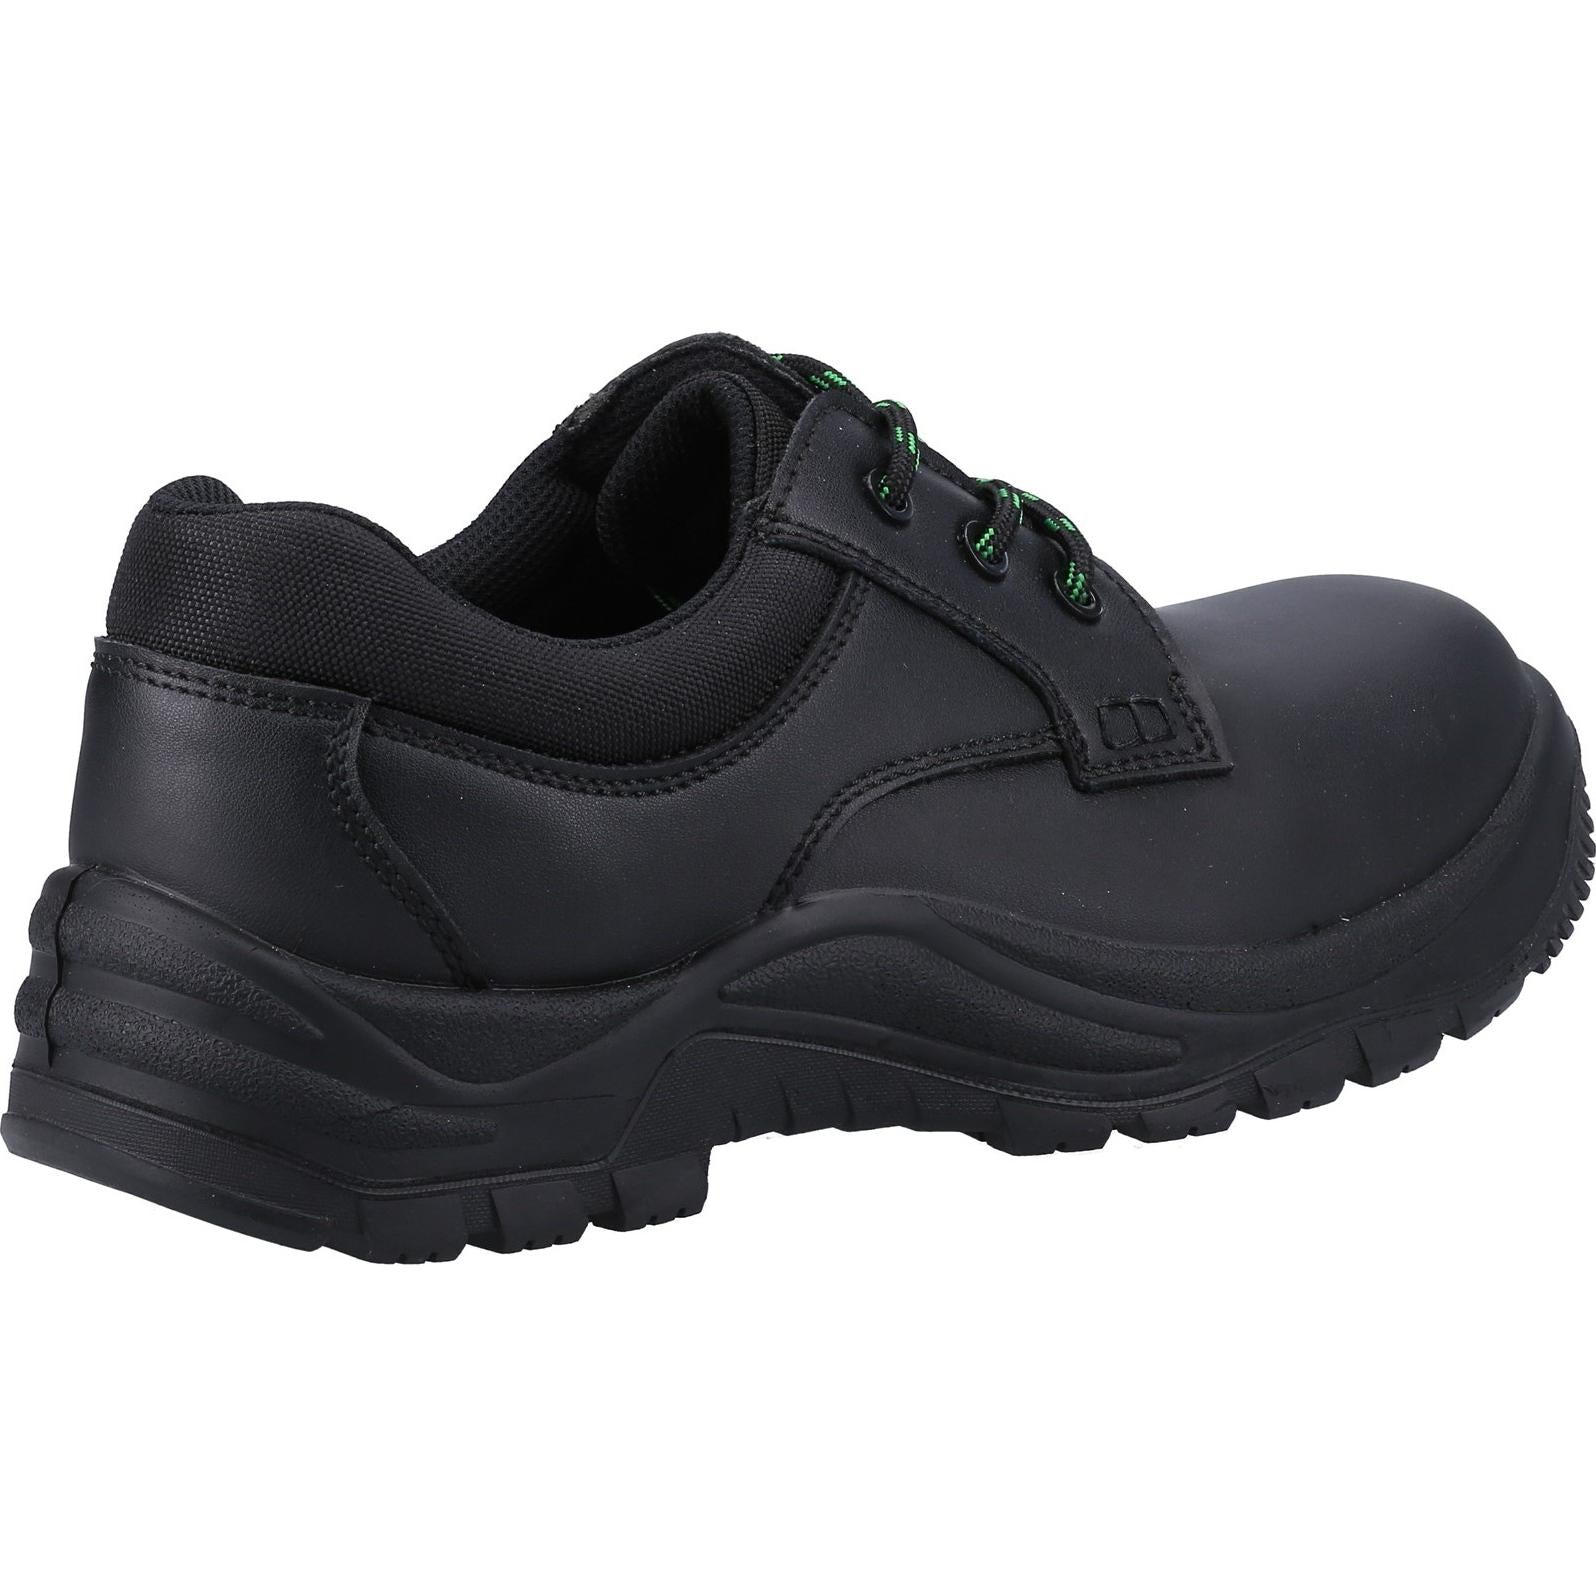 Amblers Safety 504 Shoes